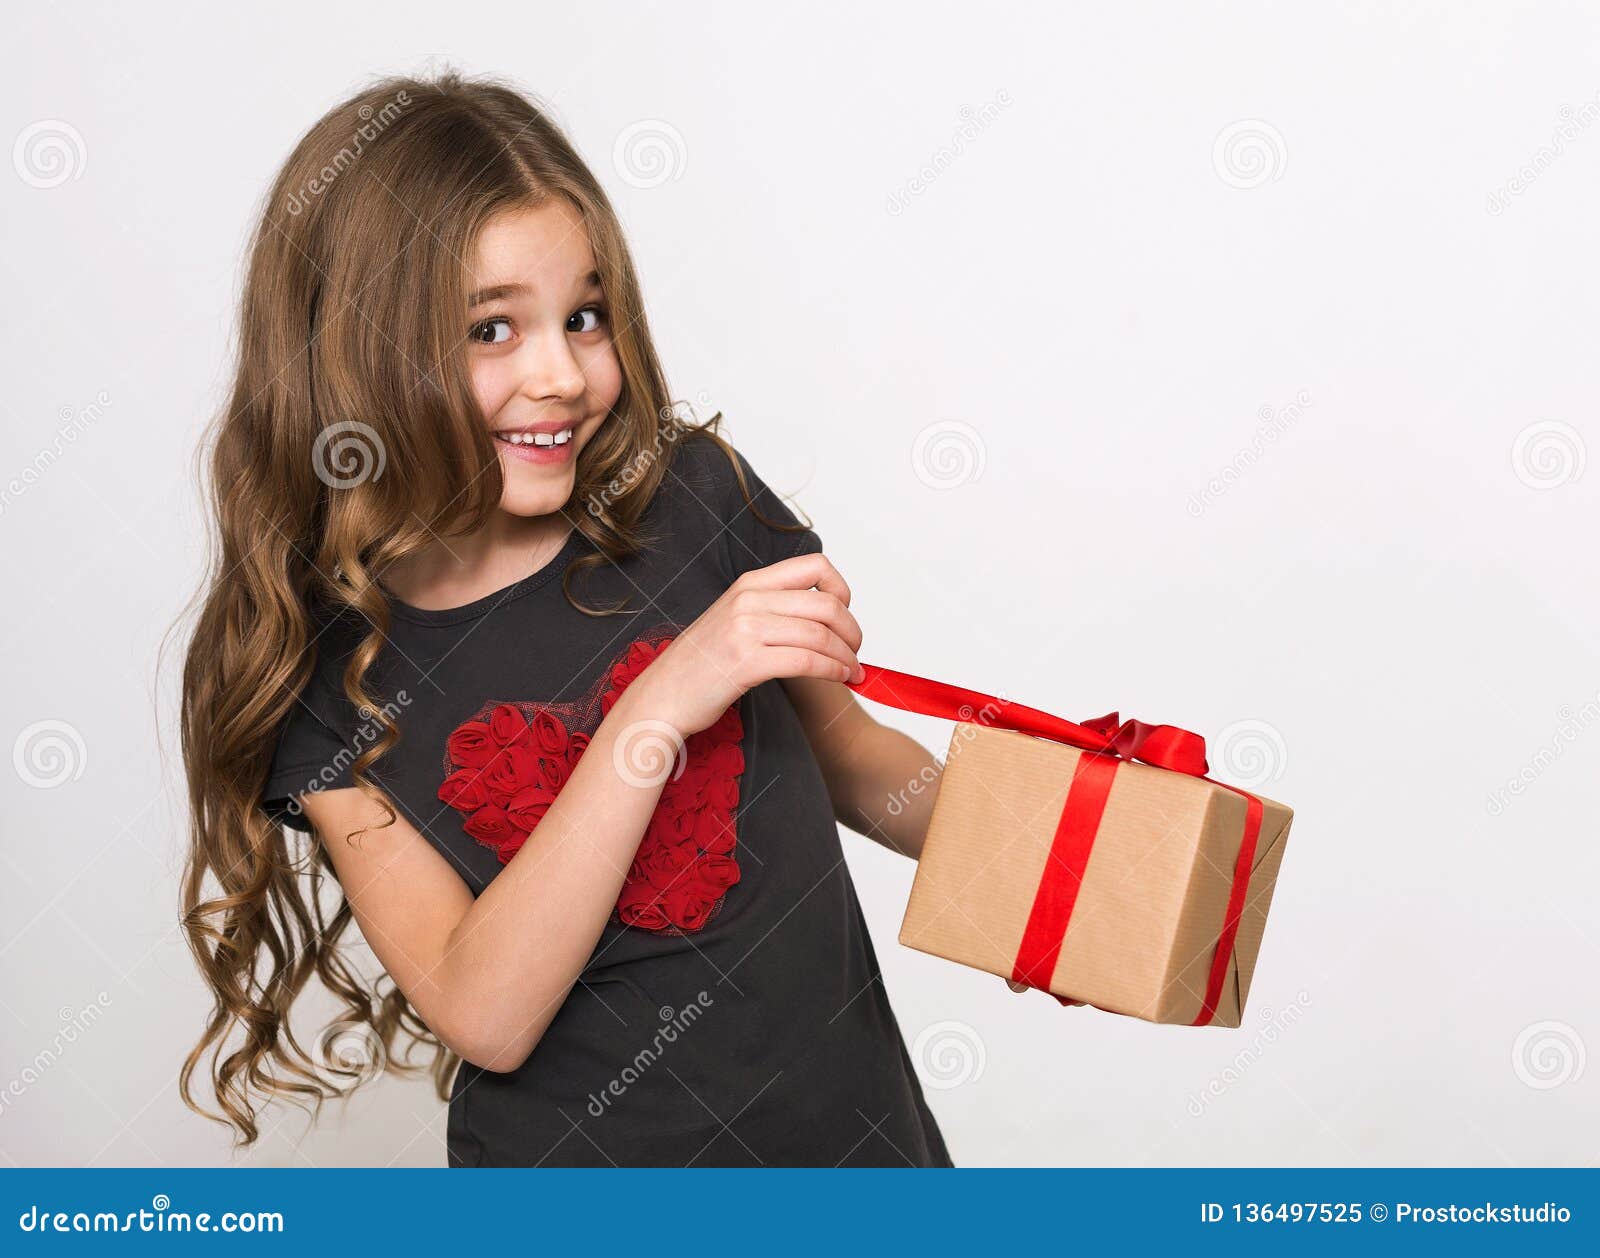 What is Inside the Box Concept. Stock Image - Image of delight ...